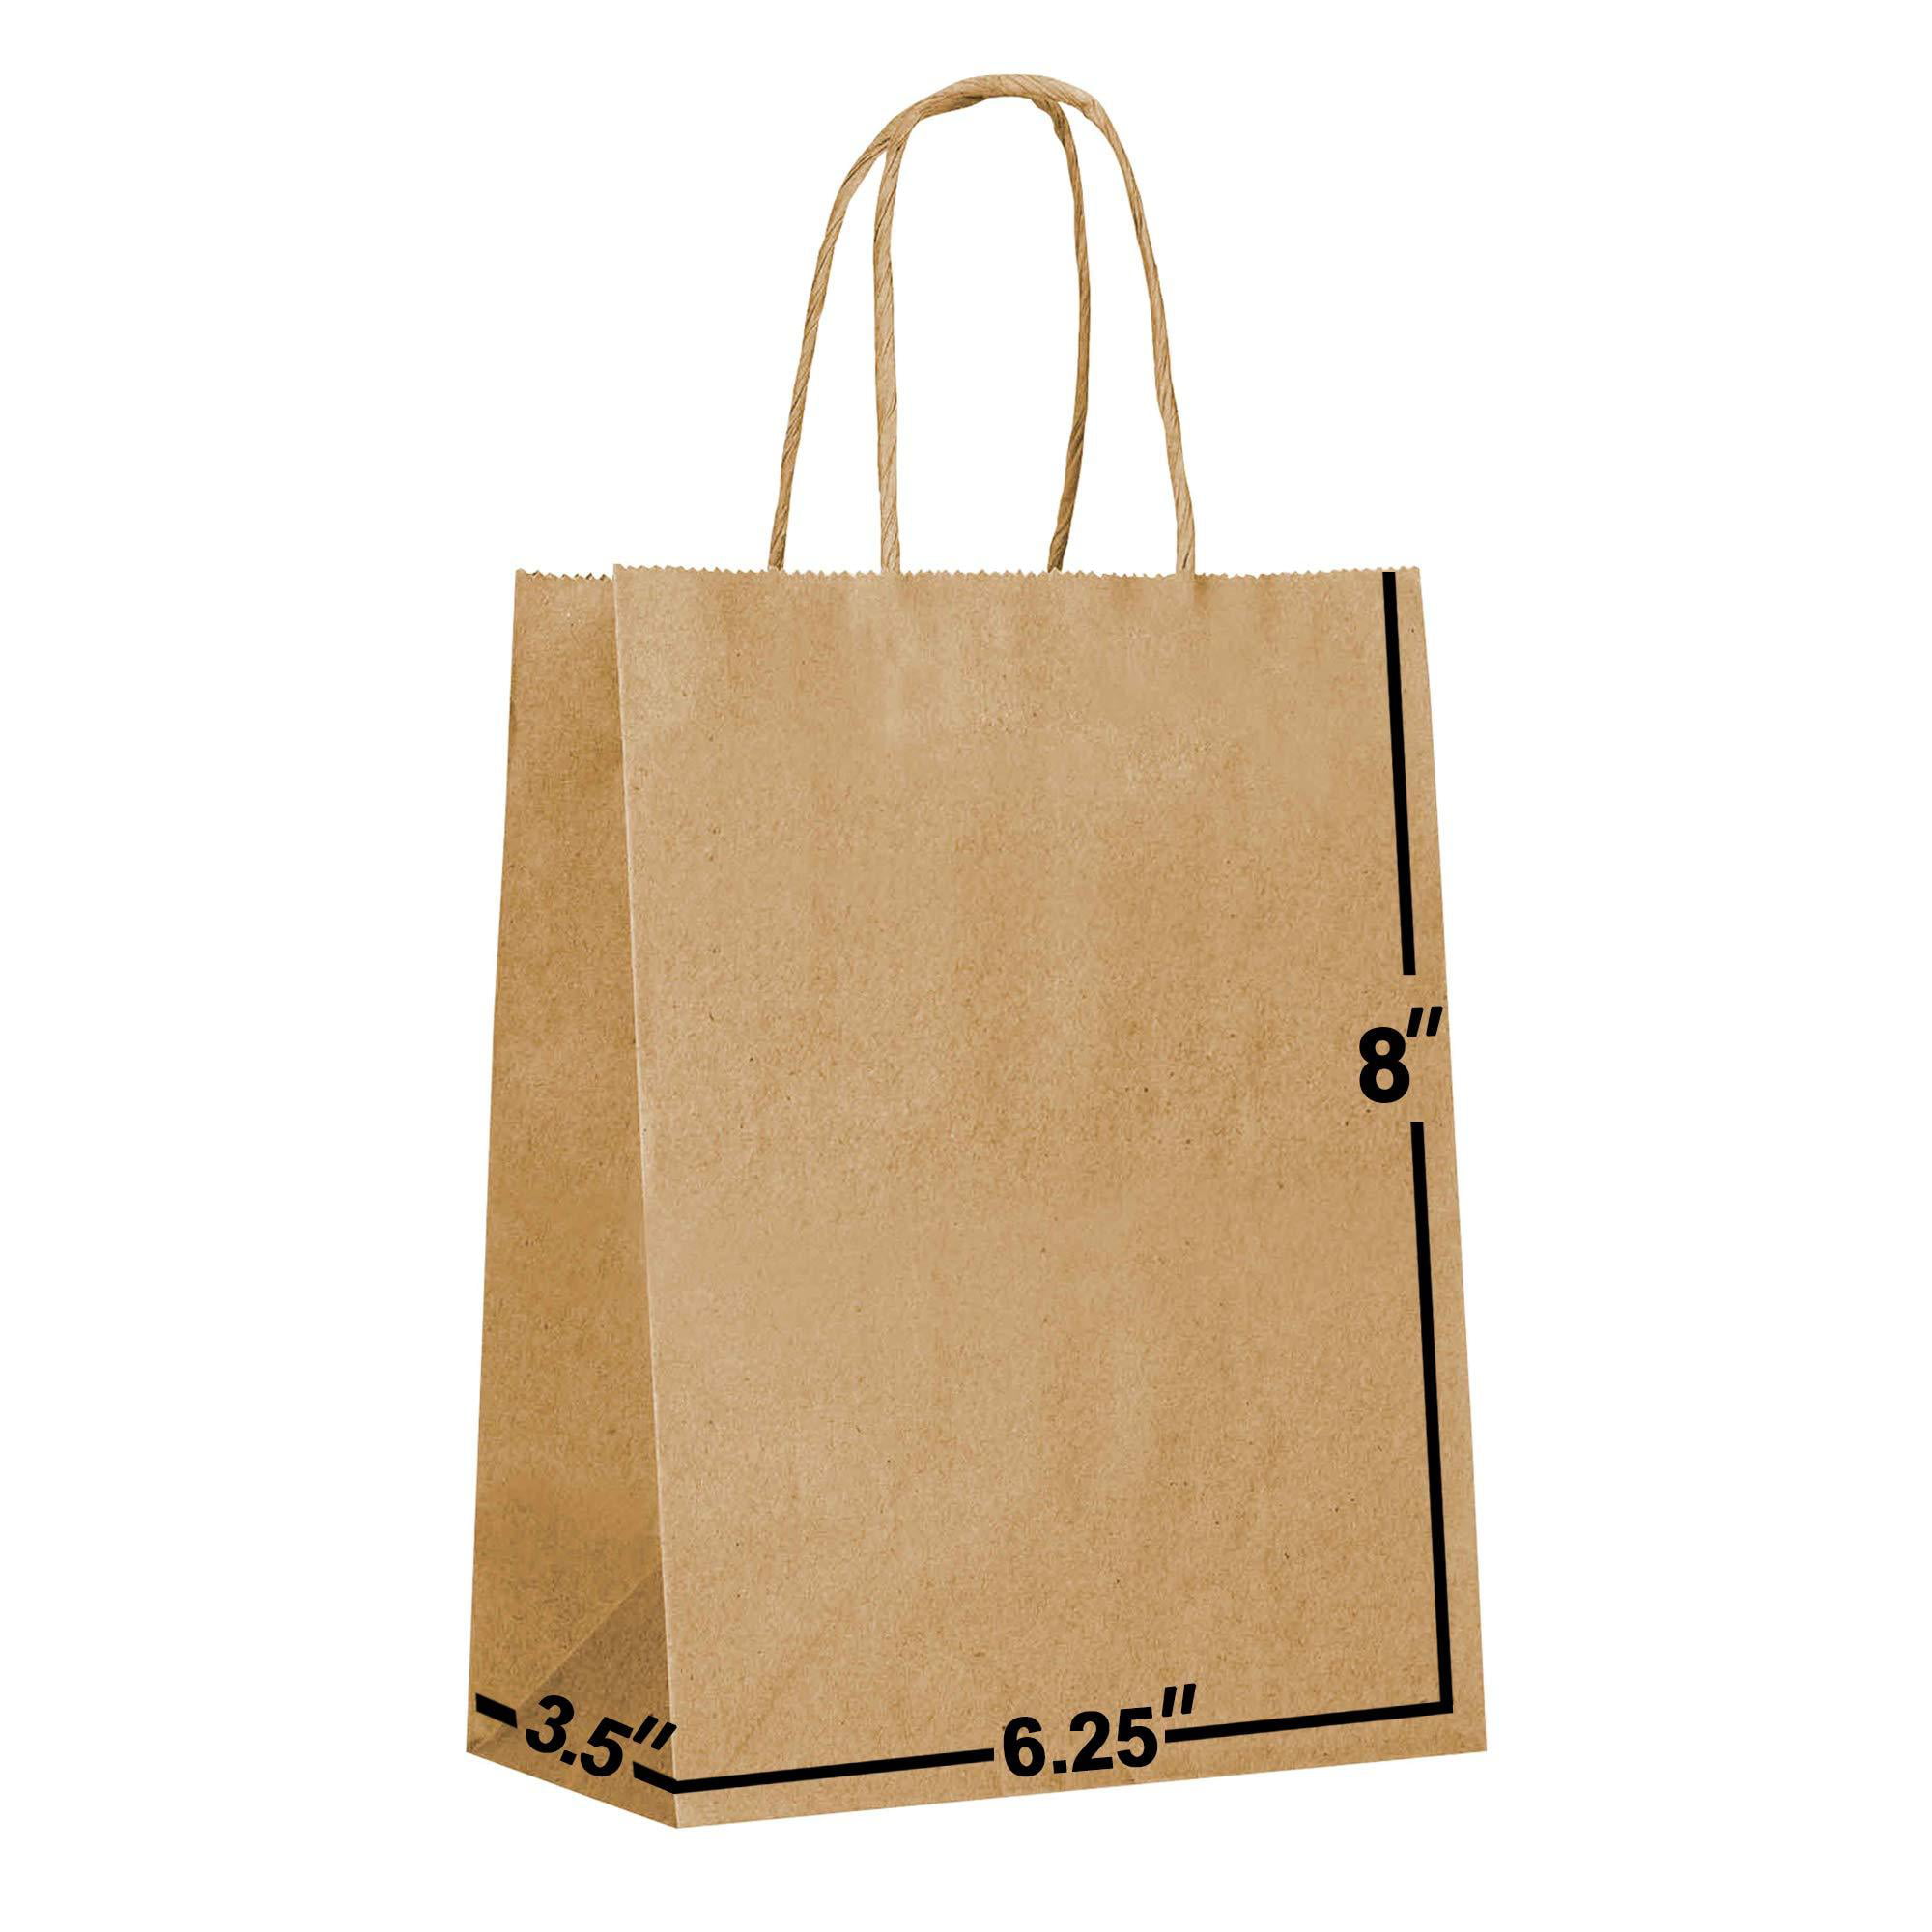 [50 Bags] 6.25 X 3.5 X 8 Kraft Paper Gift Bags with